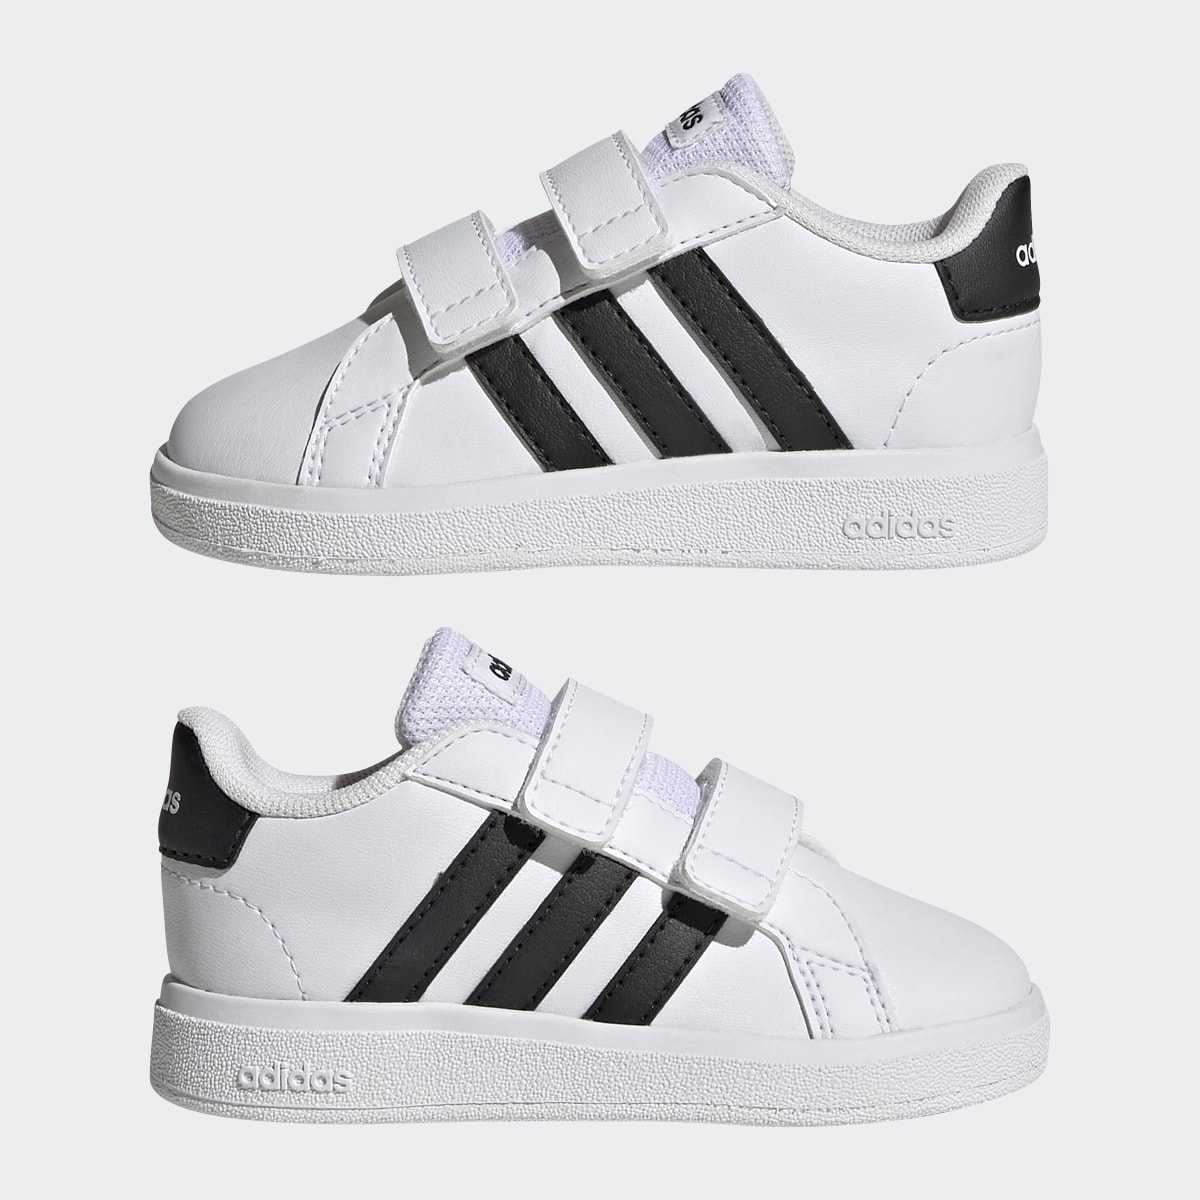 Adidas Grand Court Lifestyle Hook and Loop Schuh. 8